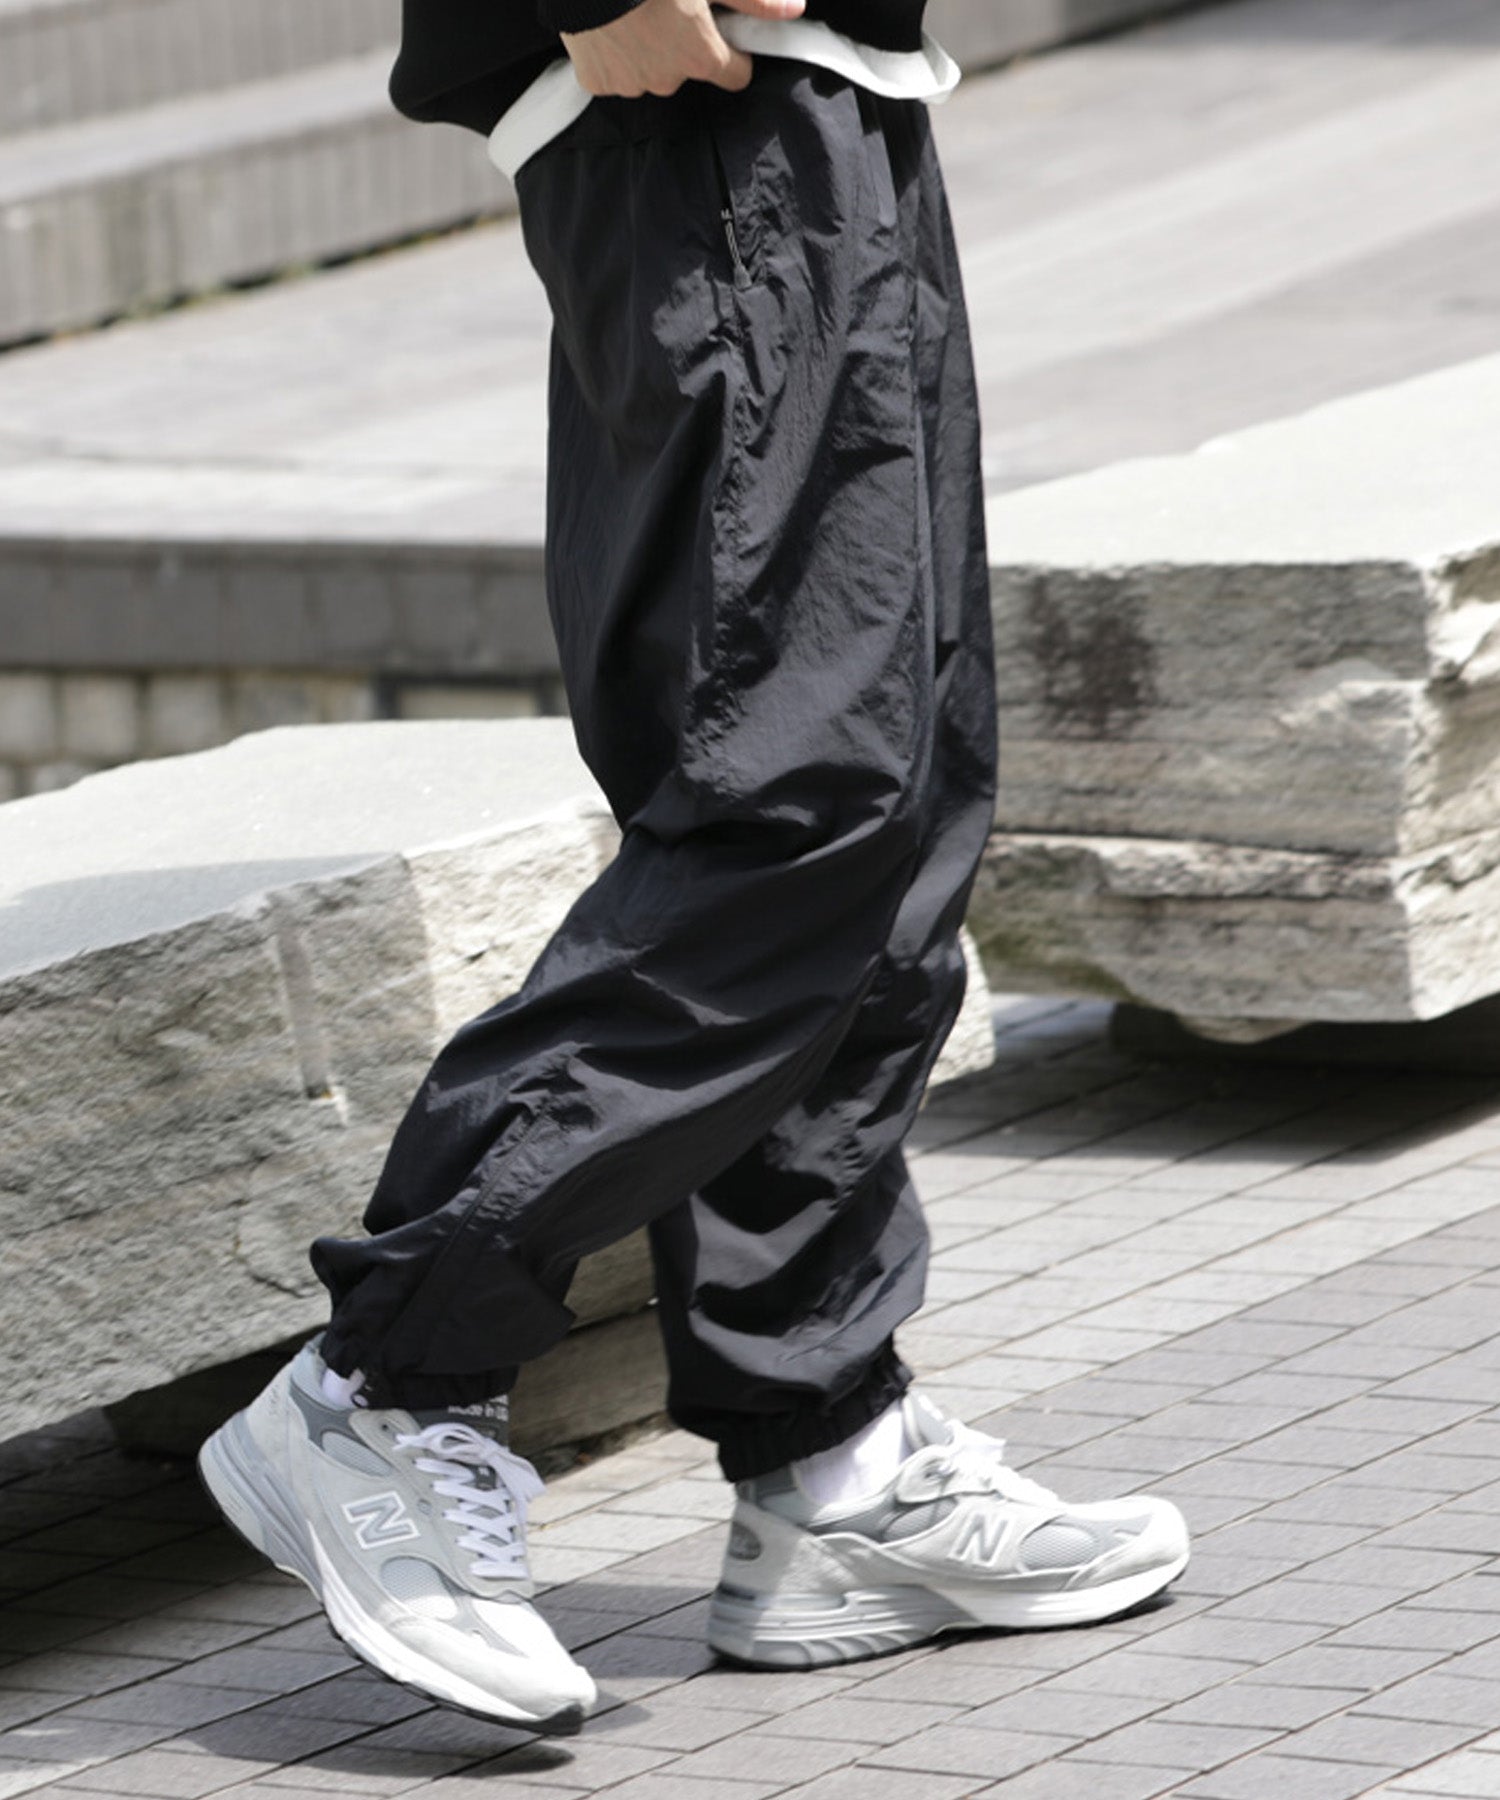 ALL-ROUND TECH PANTS